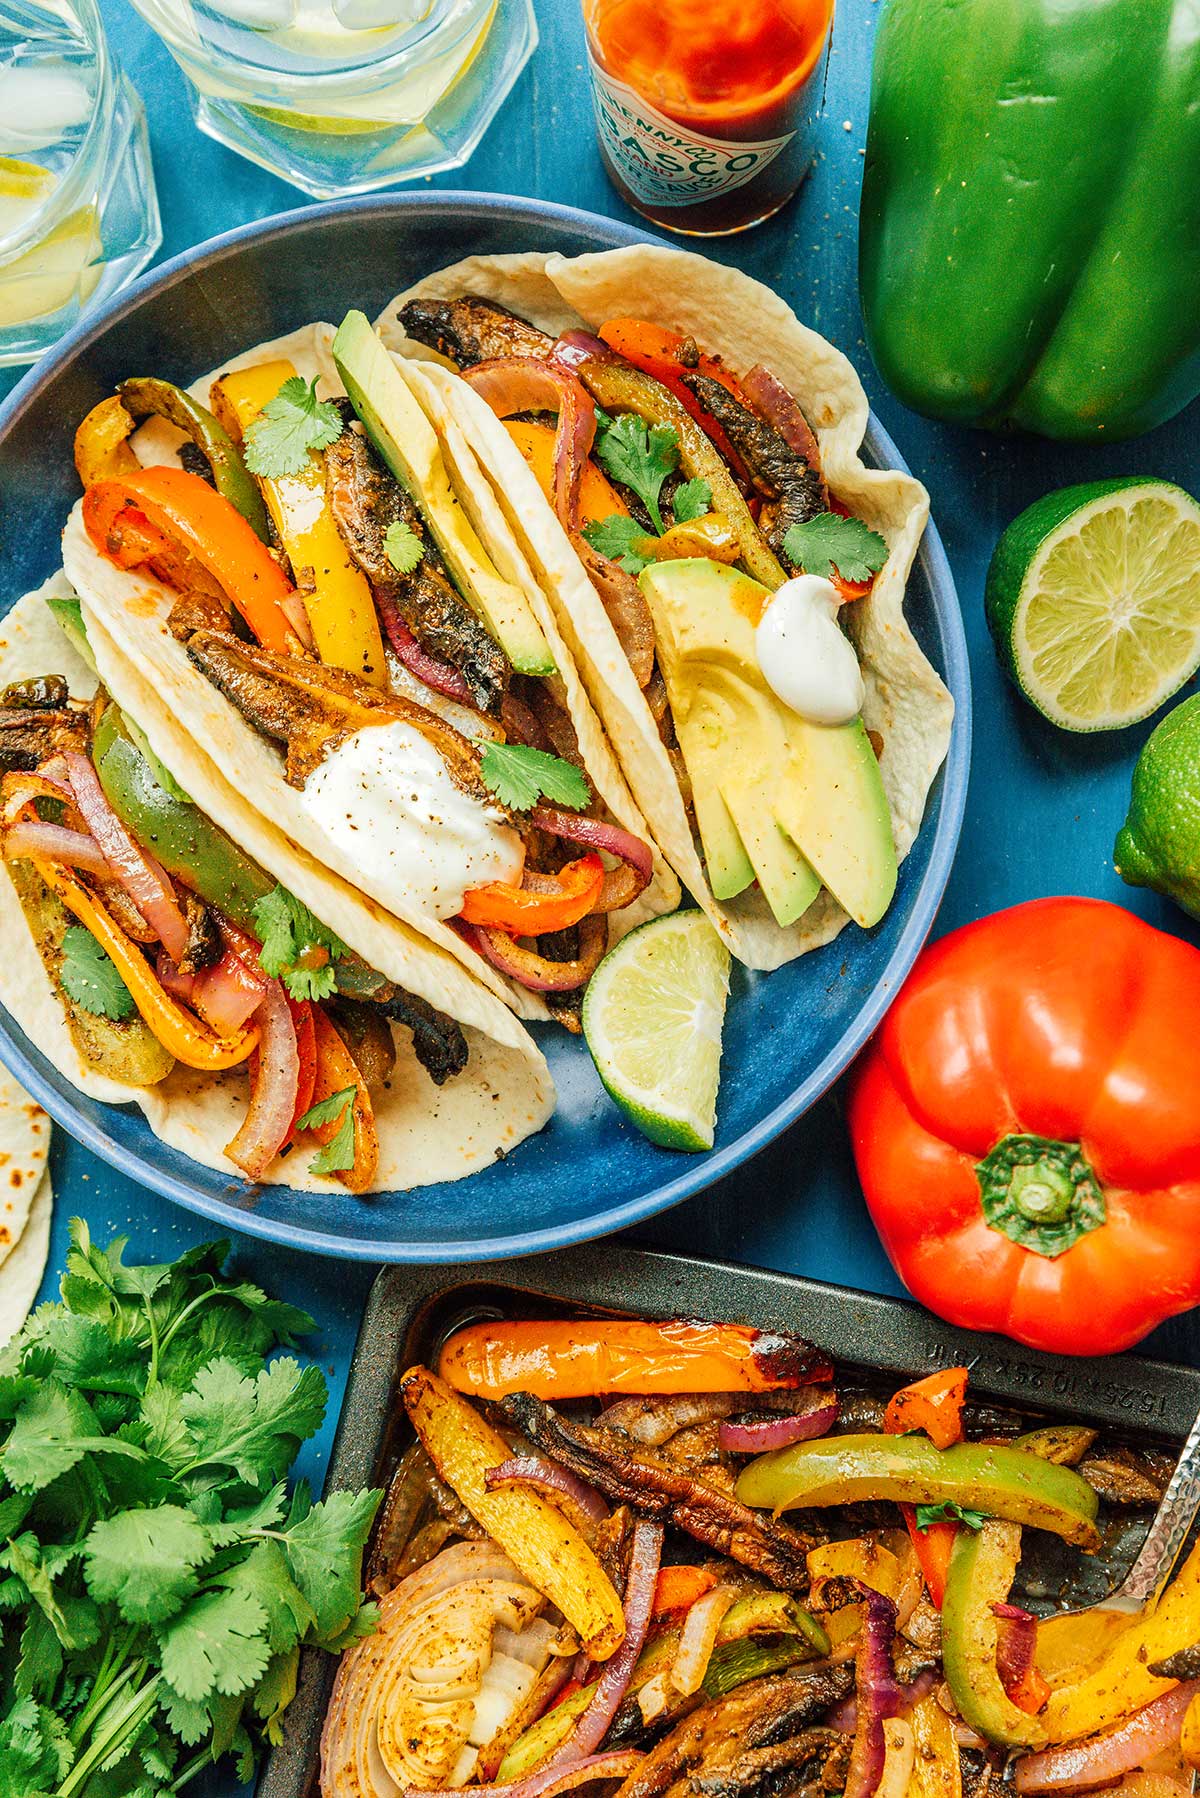 A blue plate filled with 3 vegetable fajitas and surrounded by various fajita ingredients